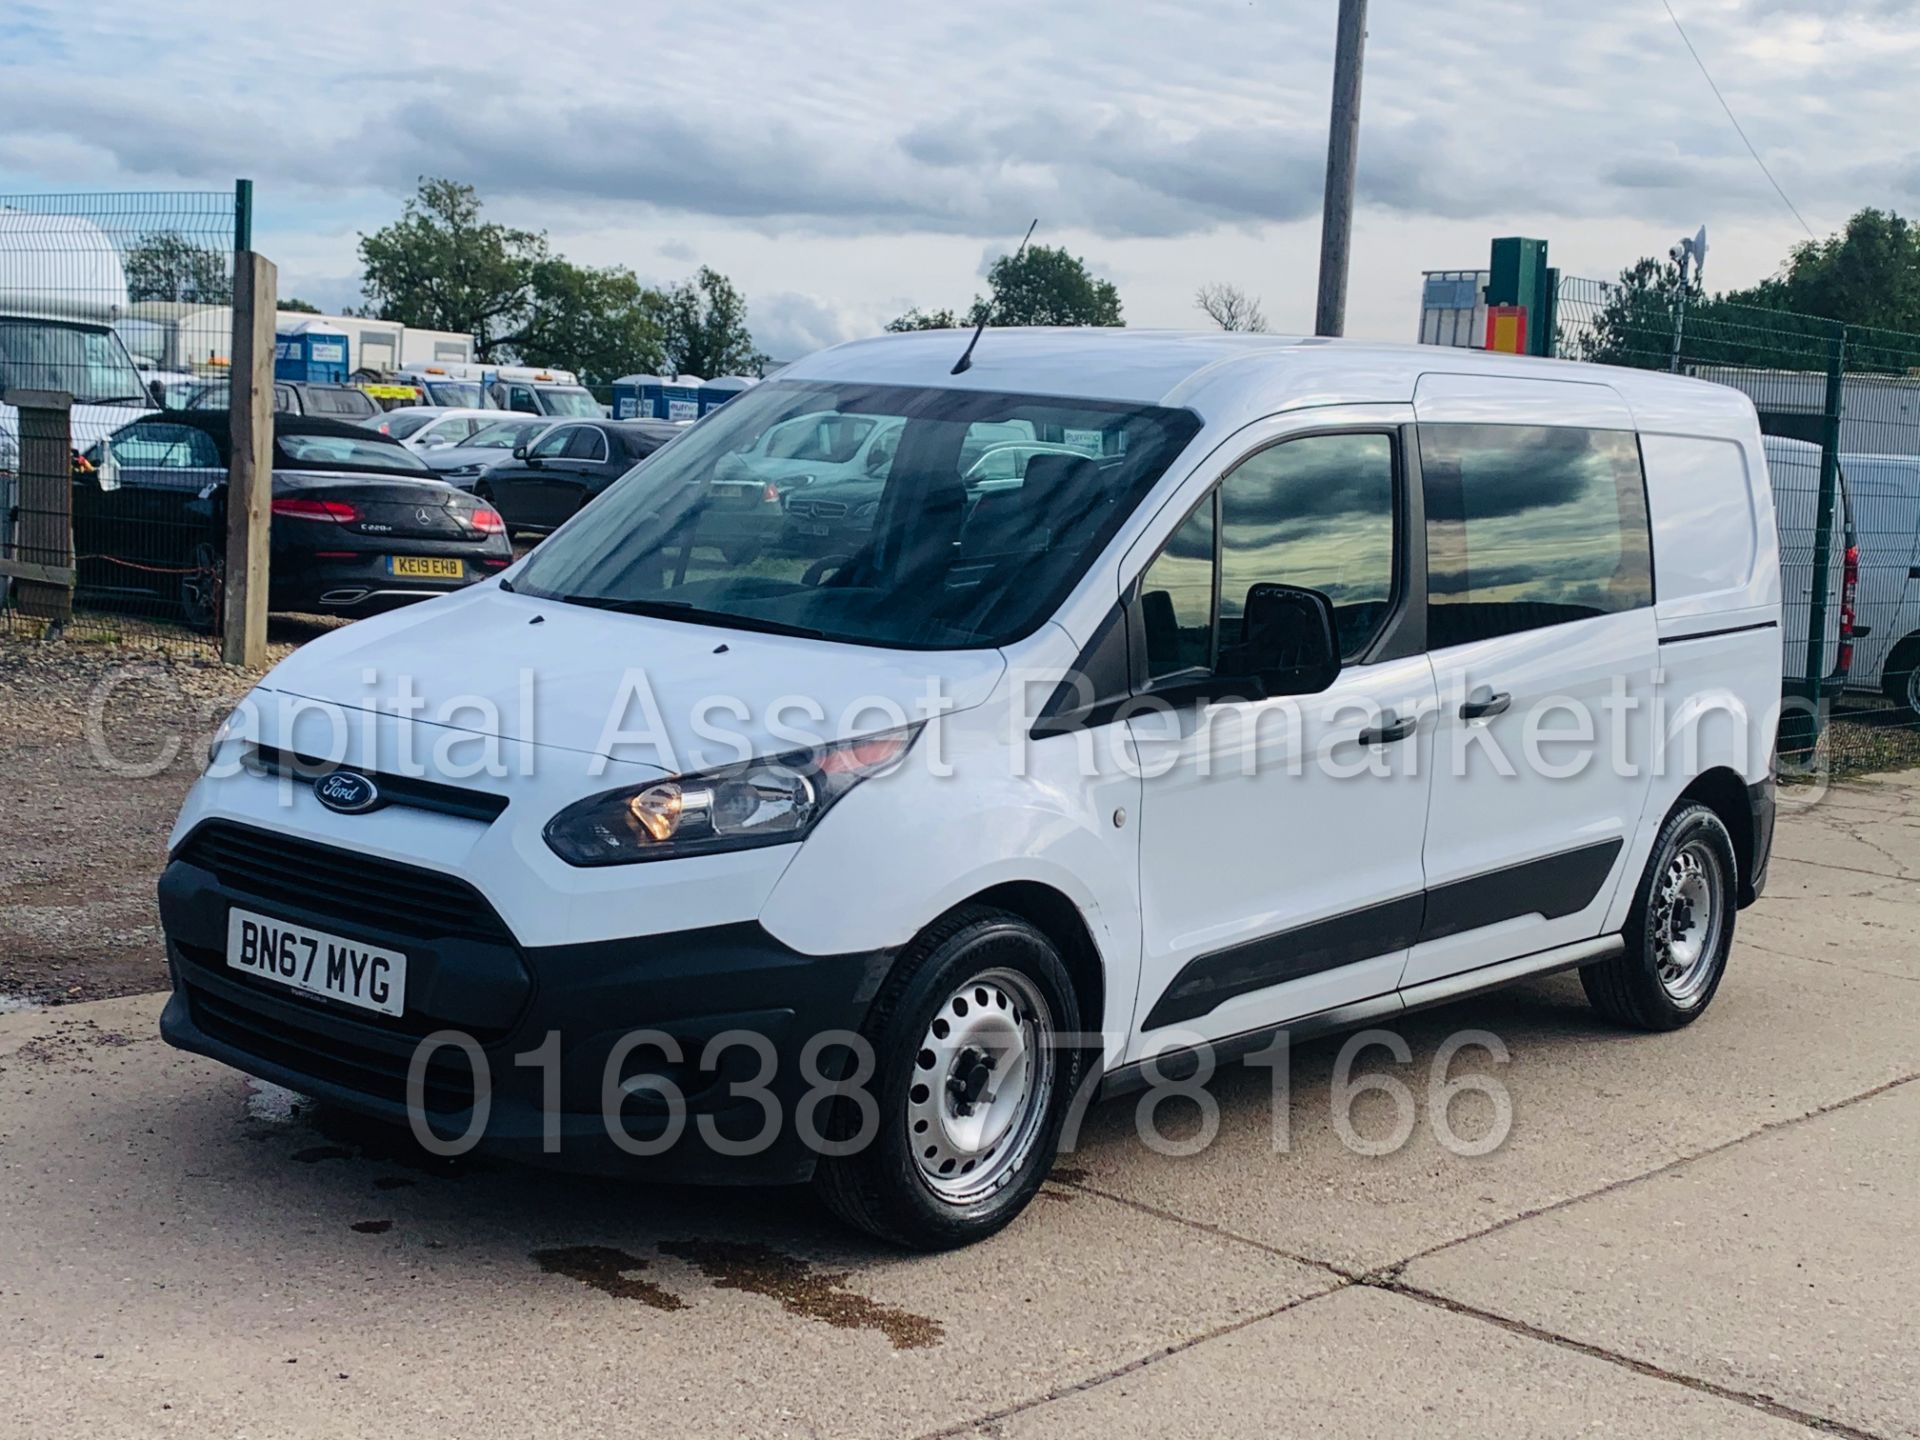 (On Sale) FORD TRANSIT CONNECT *LWB - 5 SEATER CREW VAN* (67 REG - EURO 6) 1.5 TDCI *A/C* (1 OWNER) - Image 5 of 40